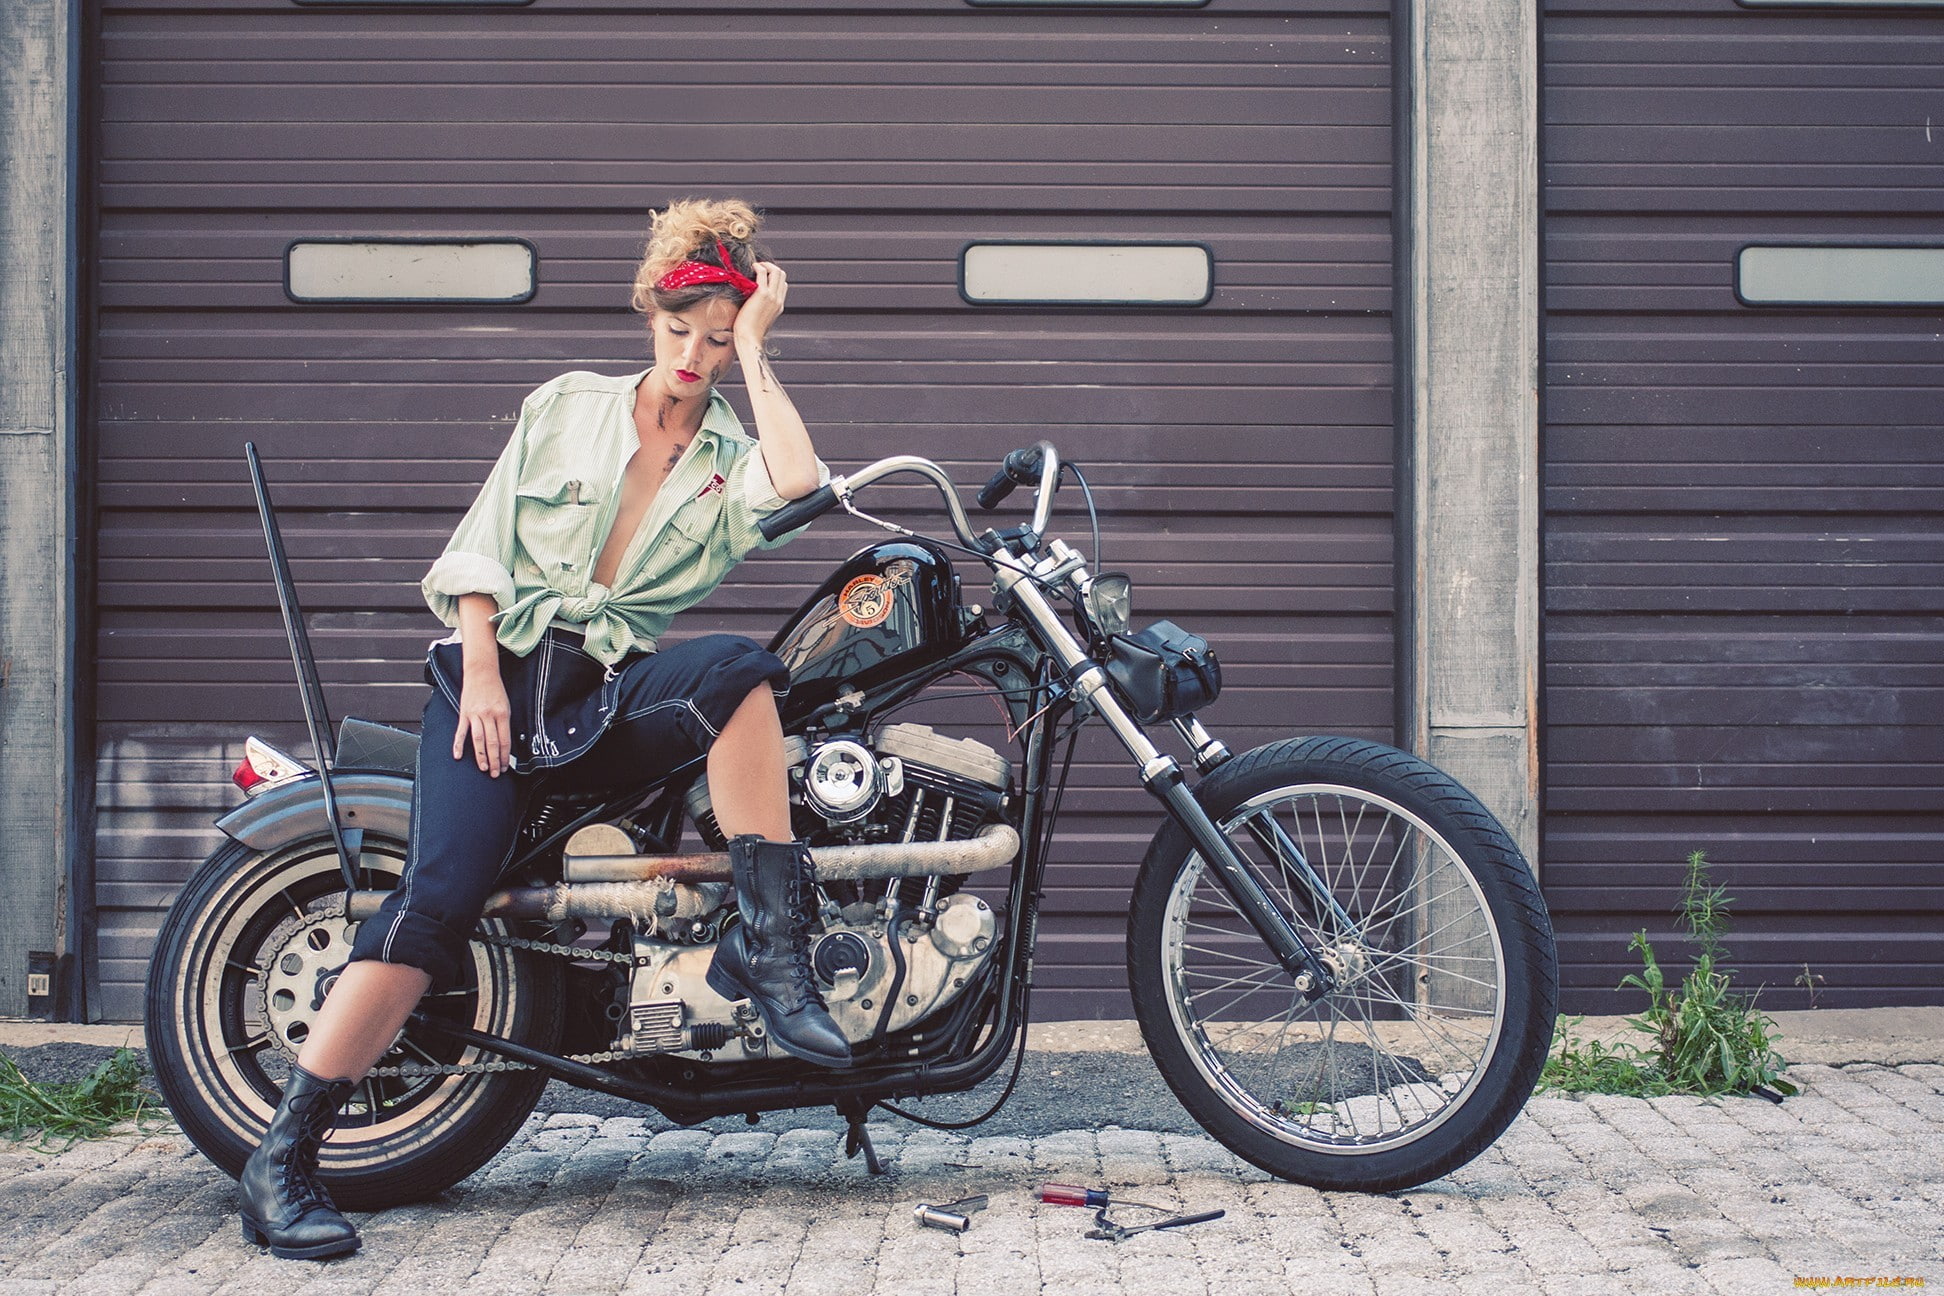 women, women with bikes, motorcycle, model, boots